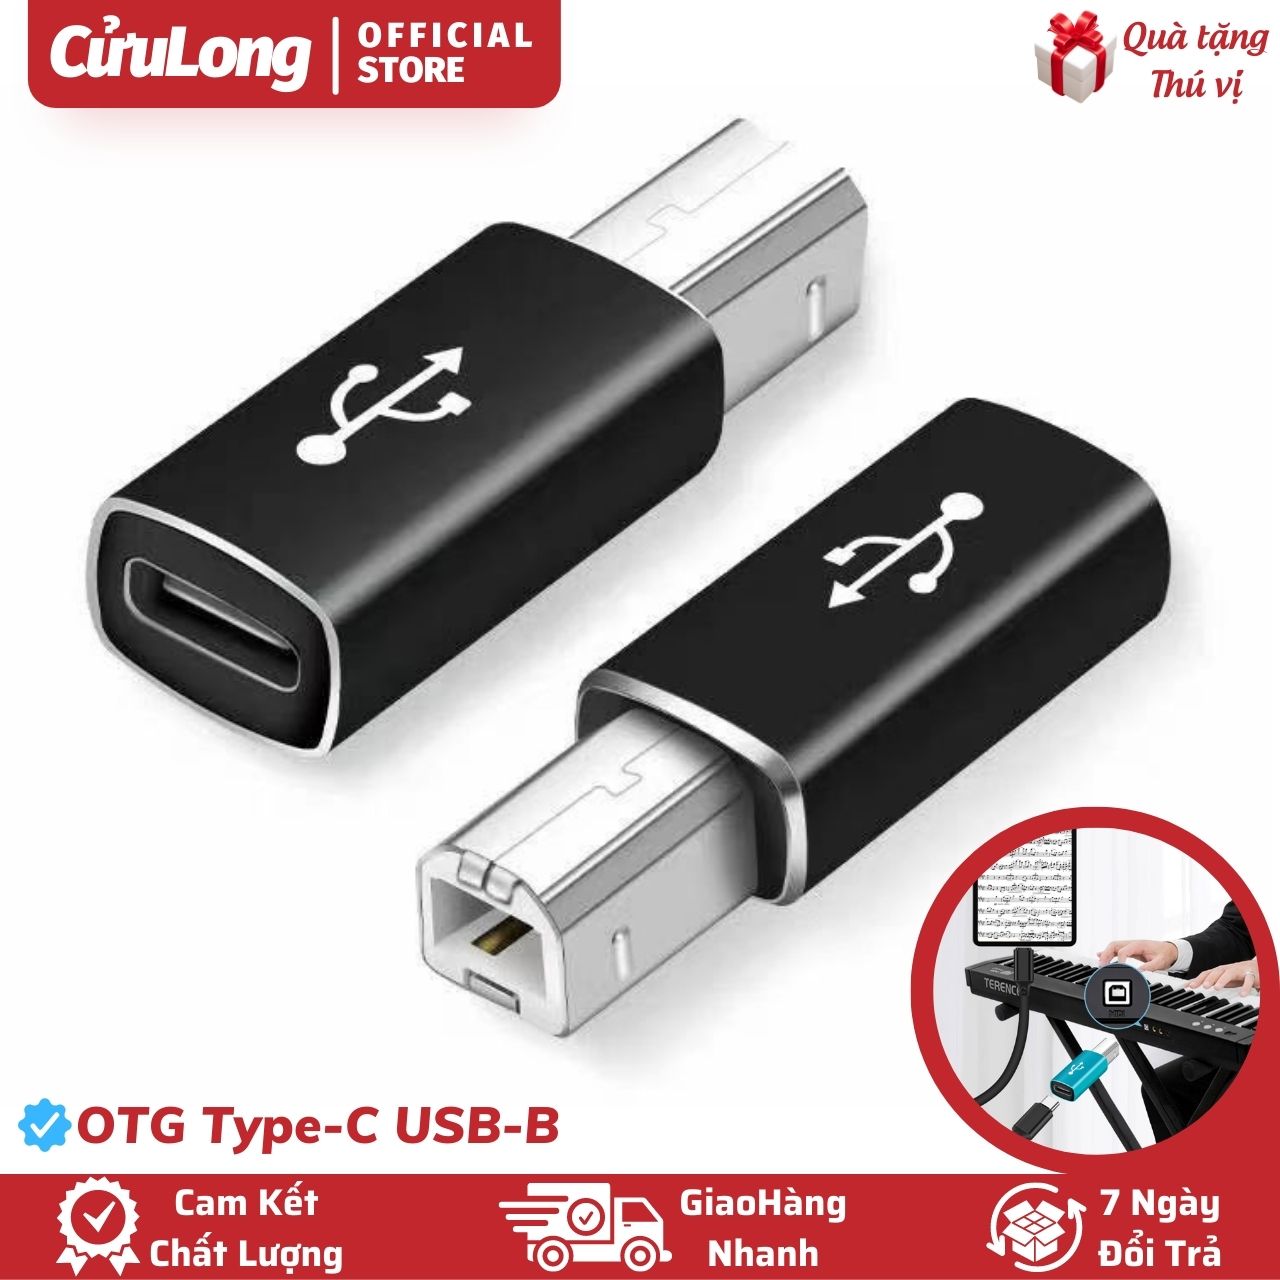 OTG Type C to USB Type B convert type C to type B 2.0 MIDI connector for